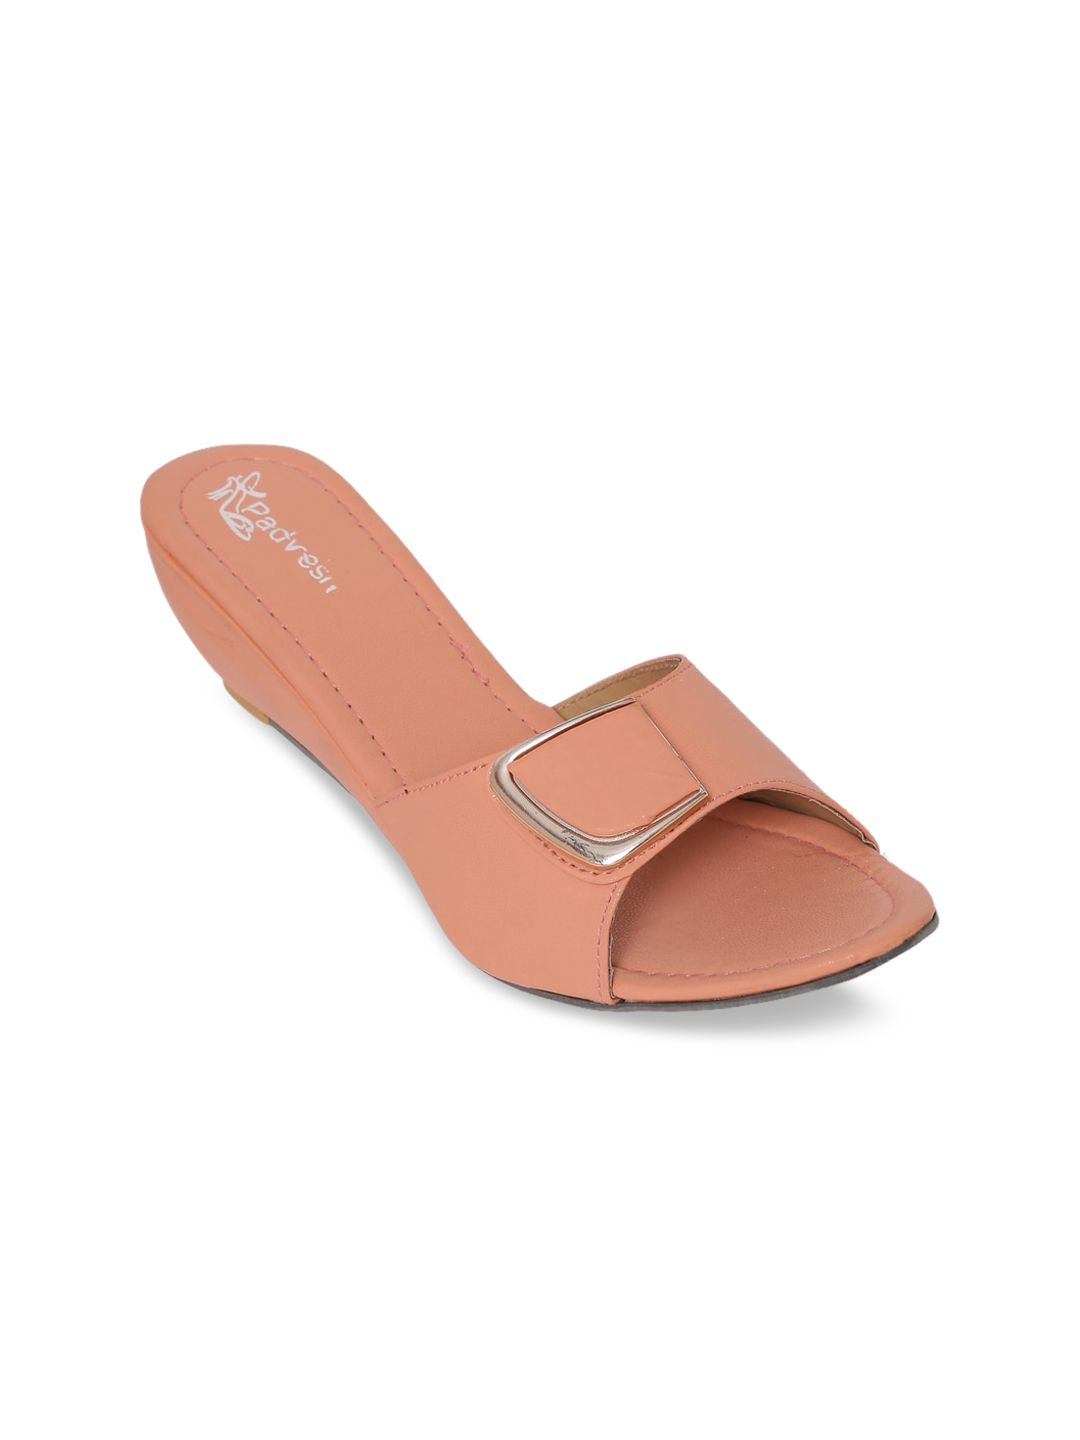 Padvesh Women Peach-Coloured Wedge Sandals Price in India